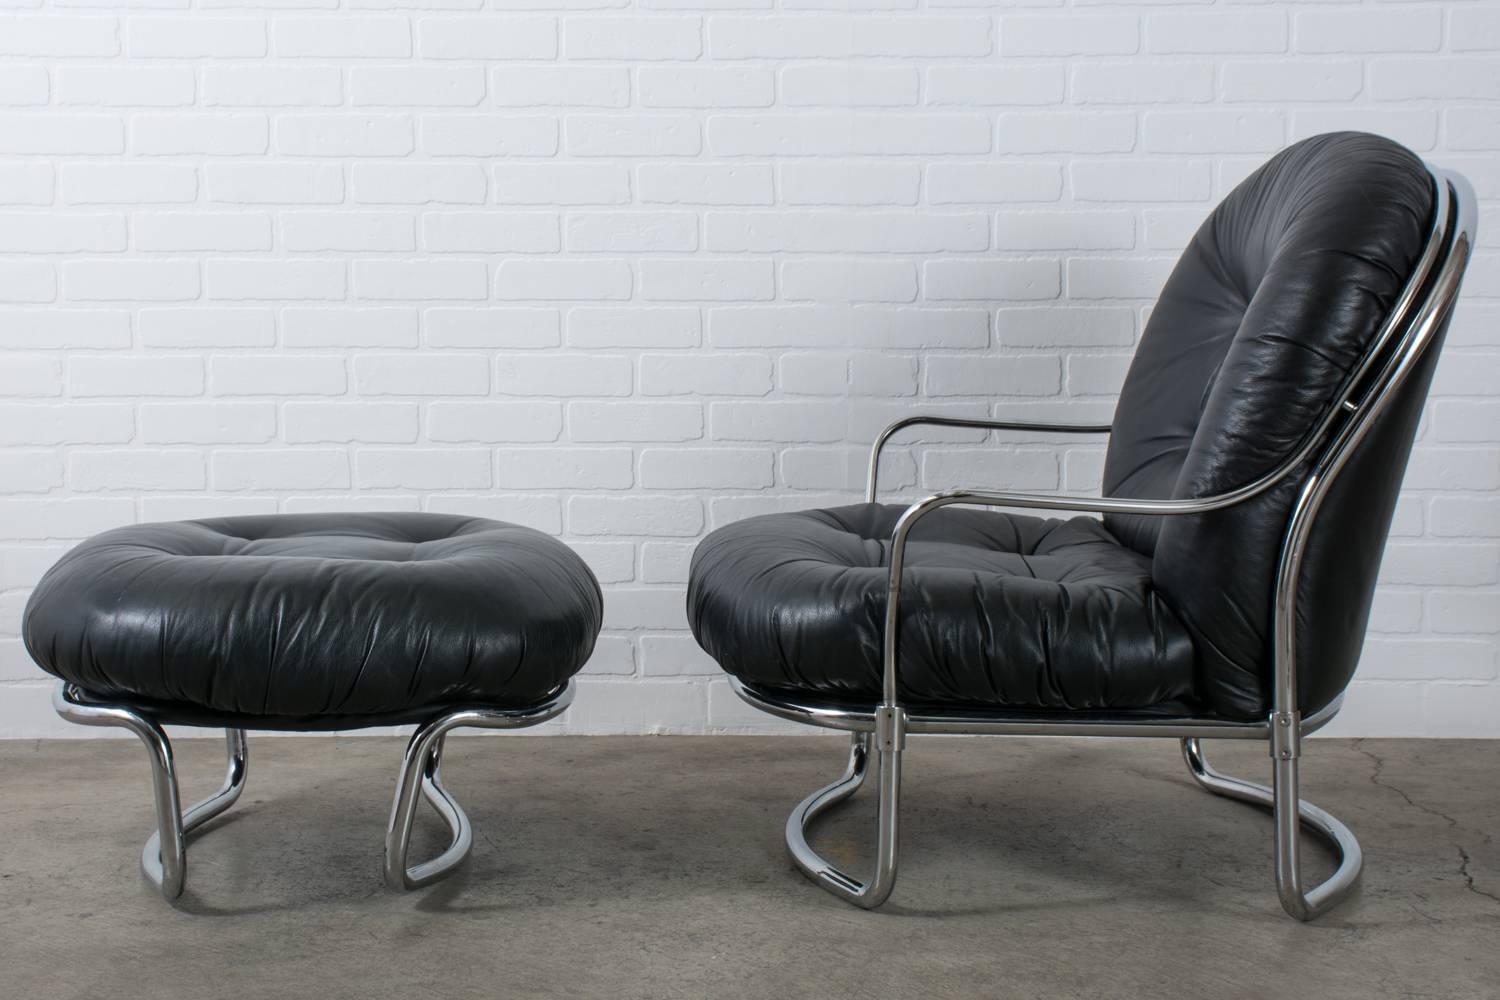 Metal Carlo di Carli Black Leather Lounge Chair and Ottoman, Italy, 1960s For Sale